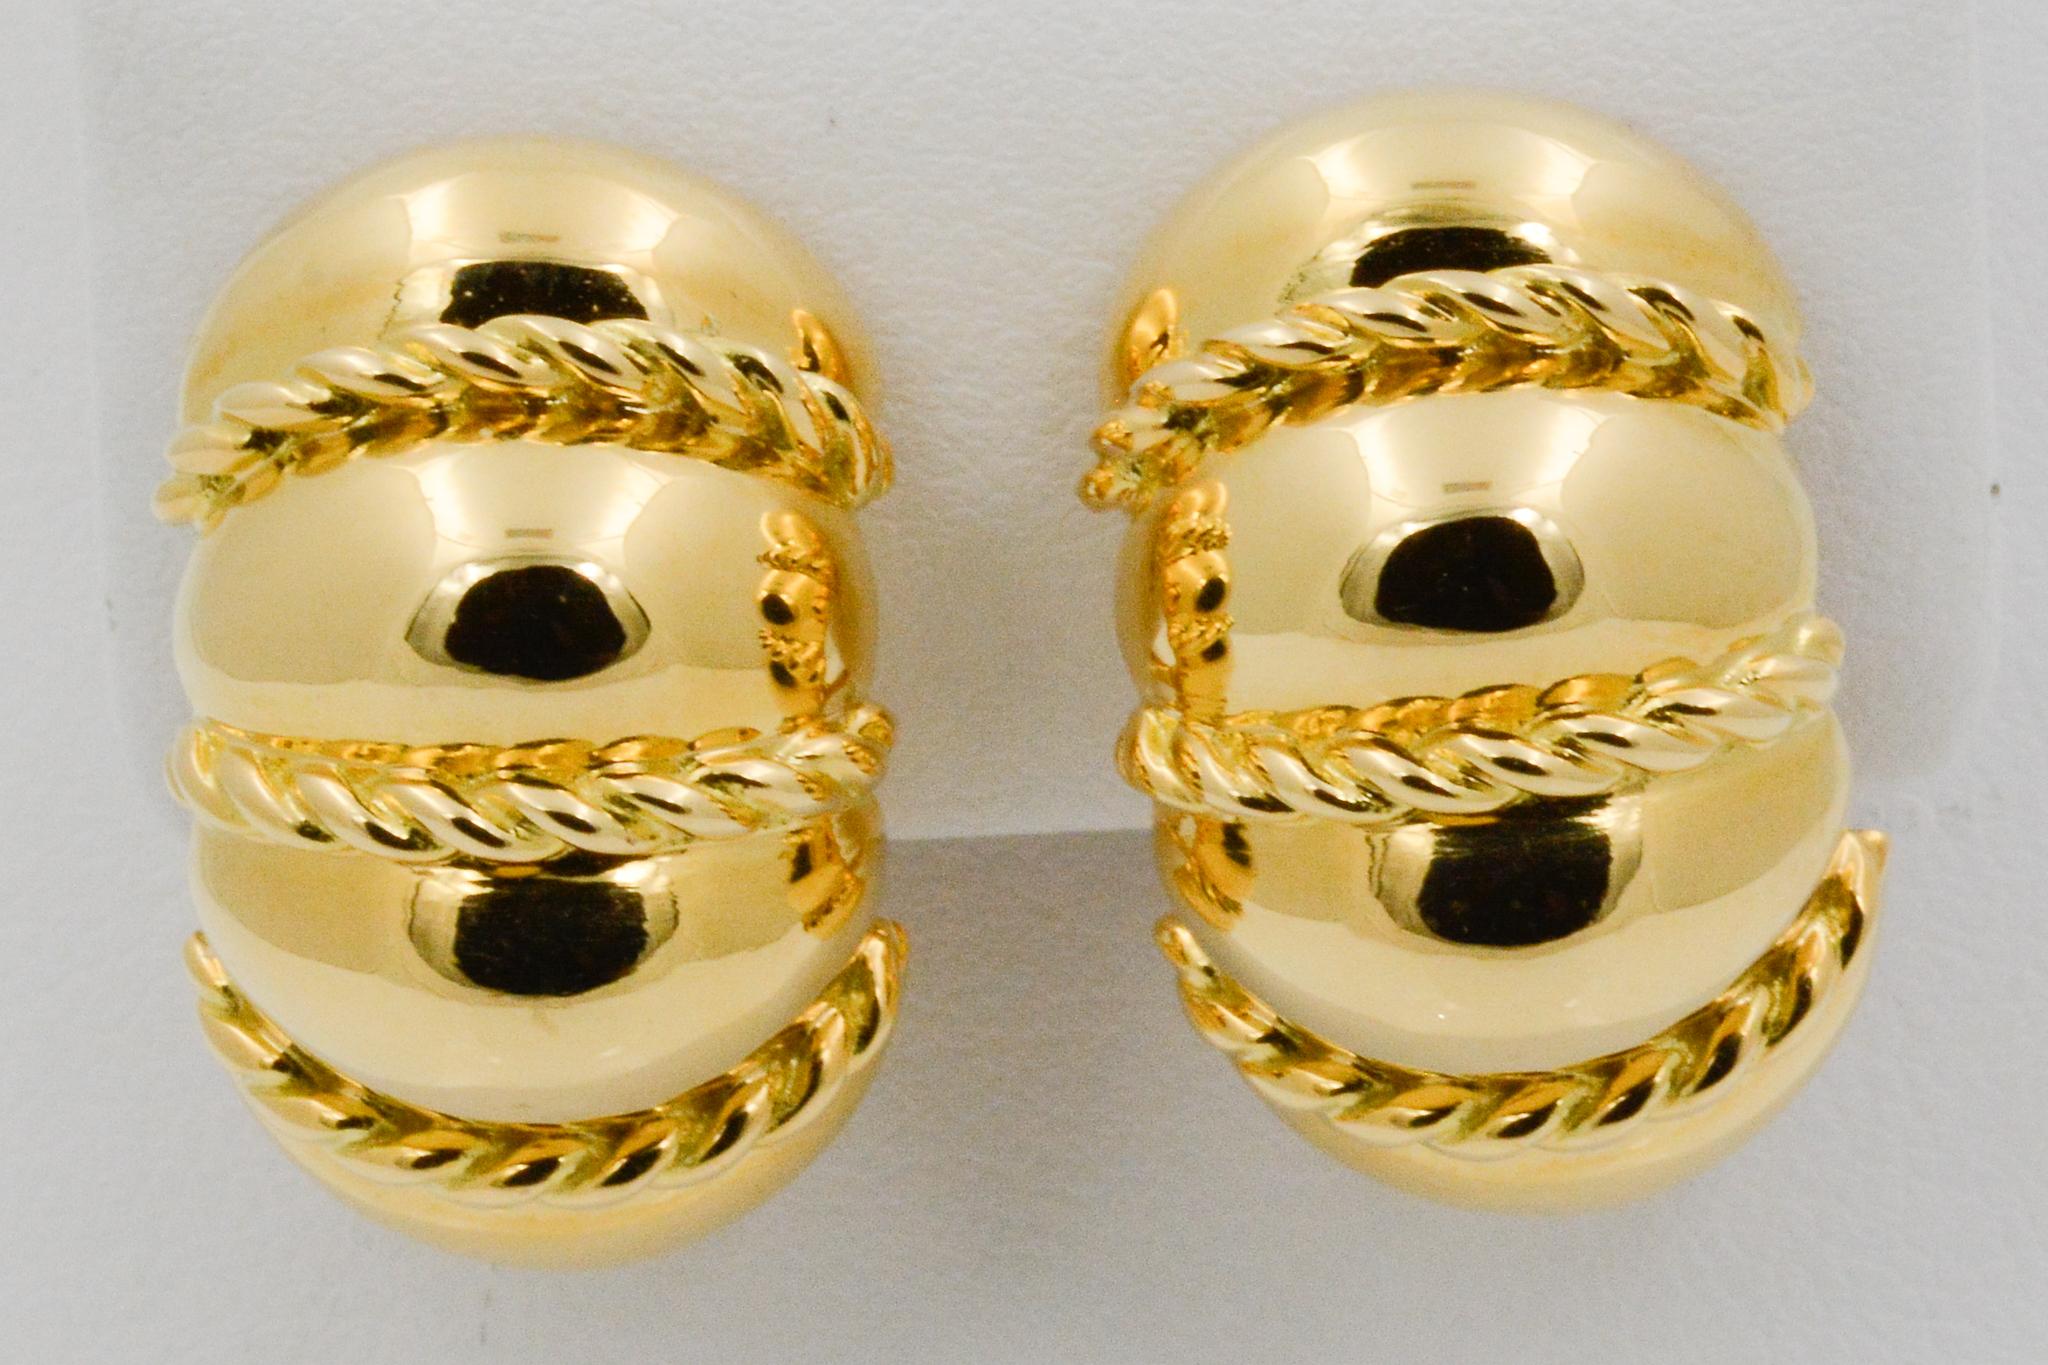 From Seaman Schepps, these 18k yellow gold Shrimp earrings have a rope design. Signed Seaman Schepps.